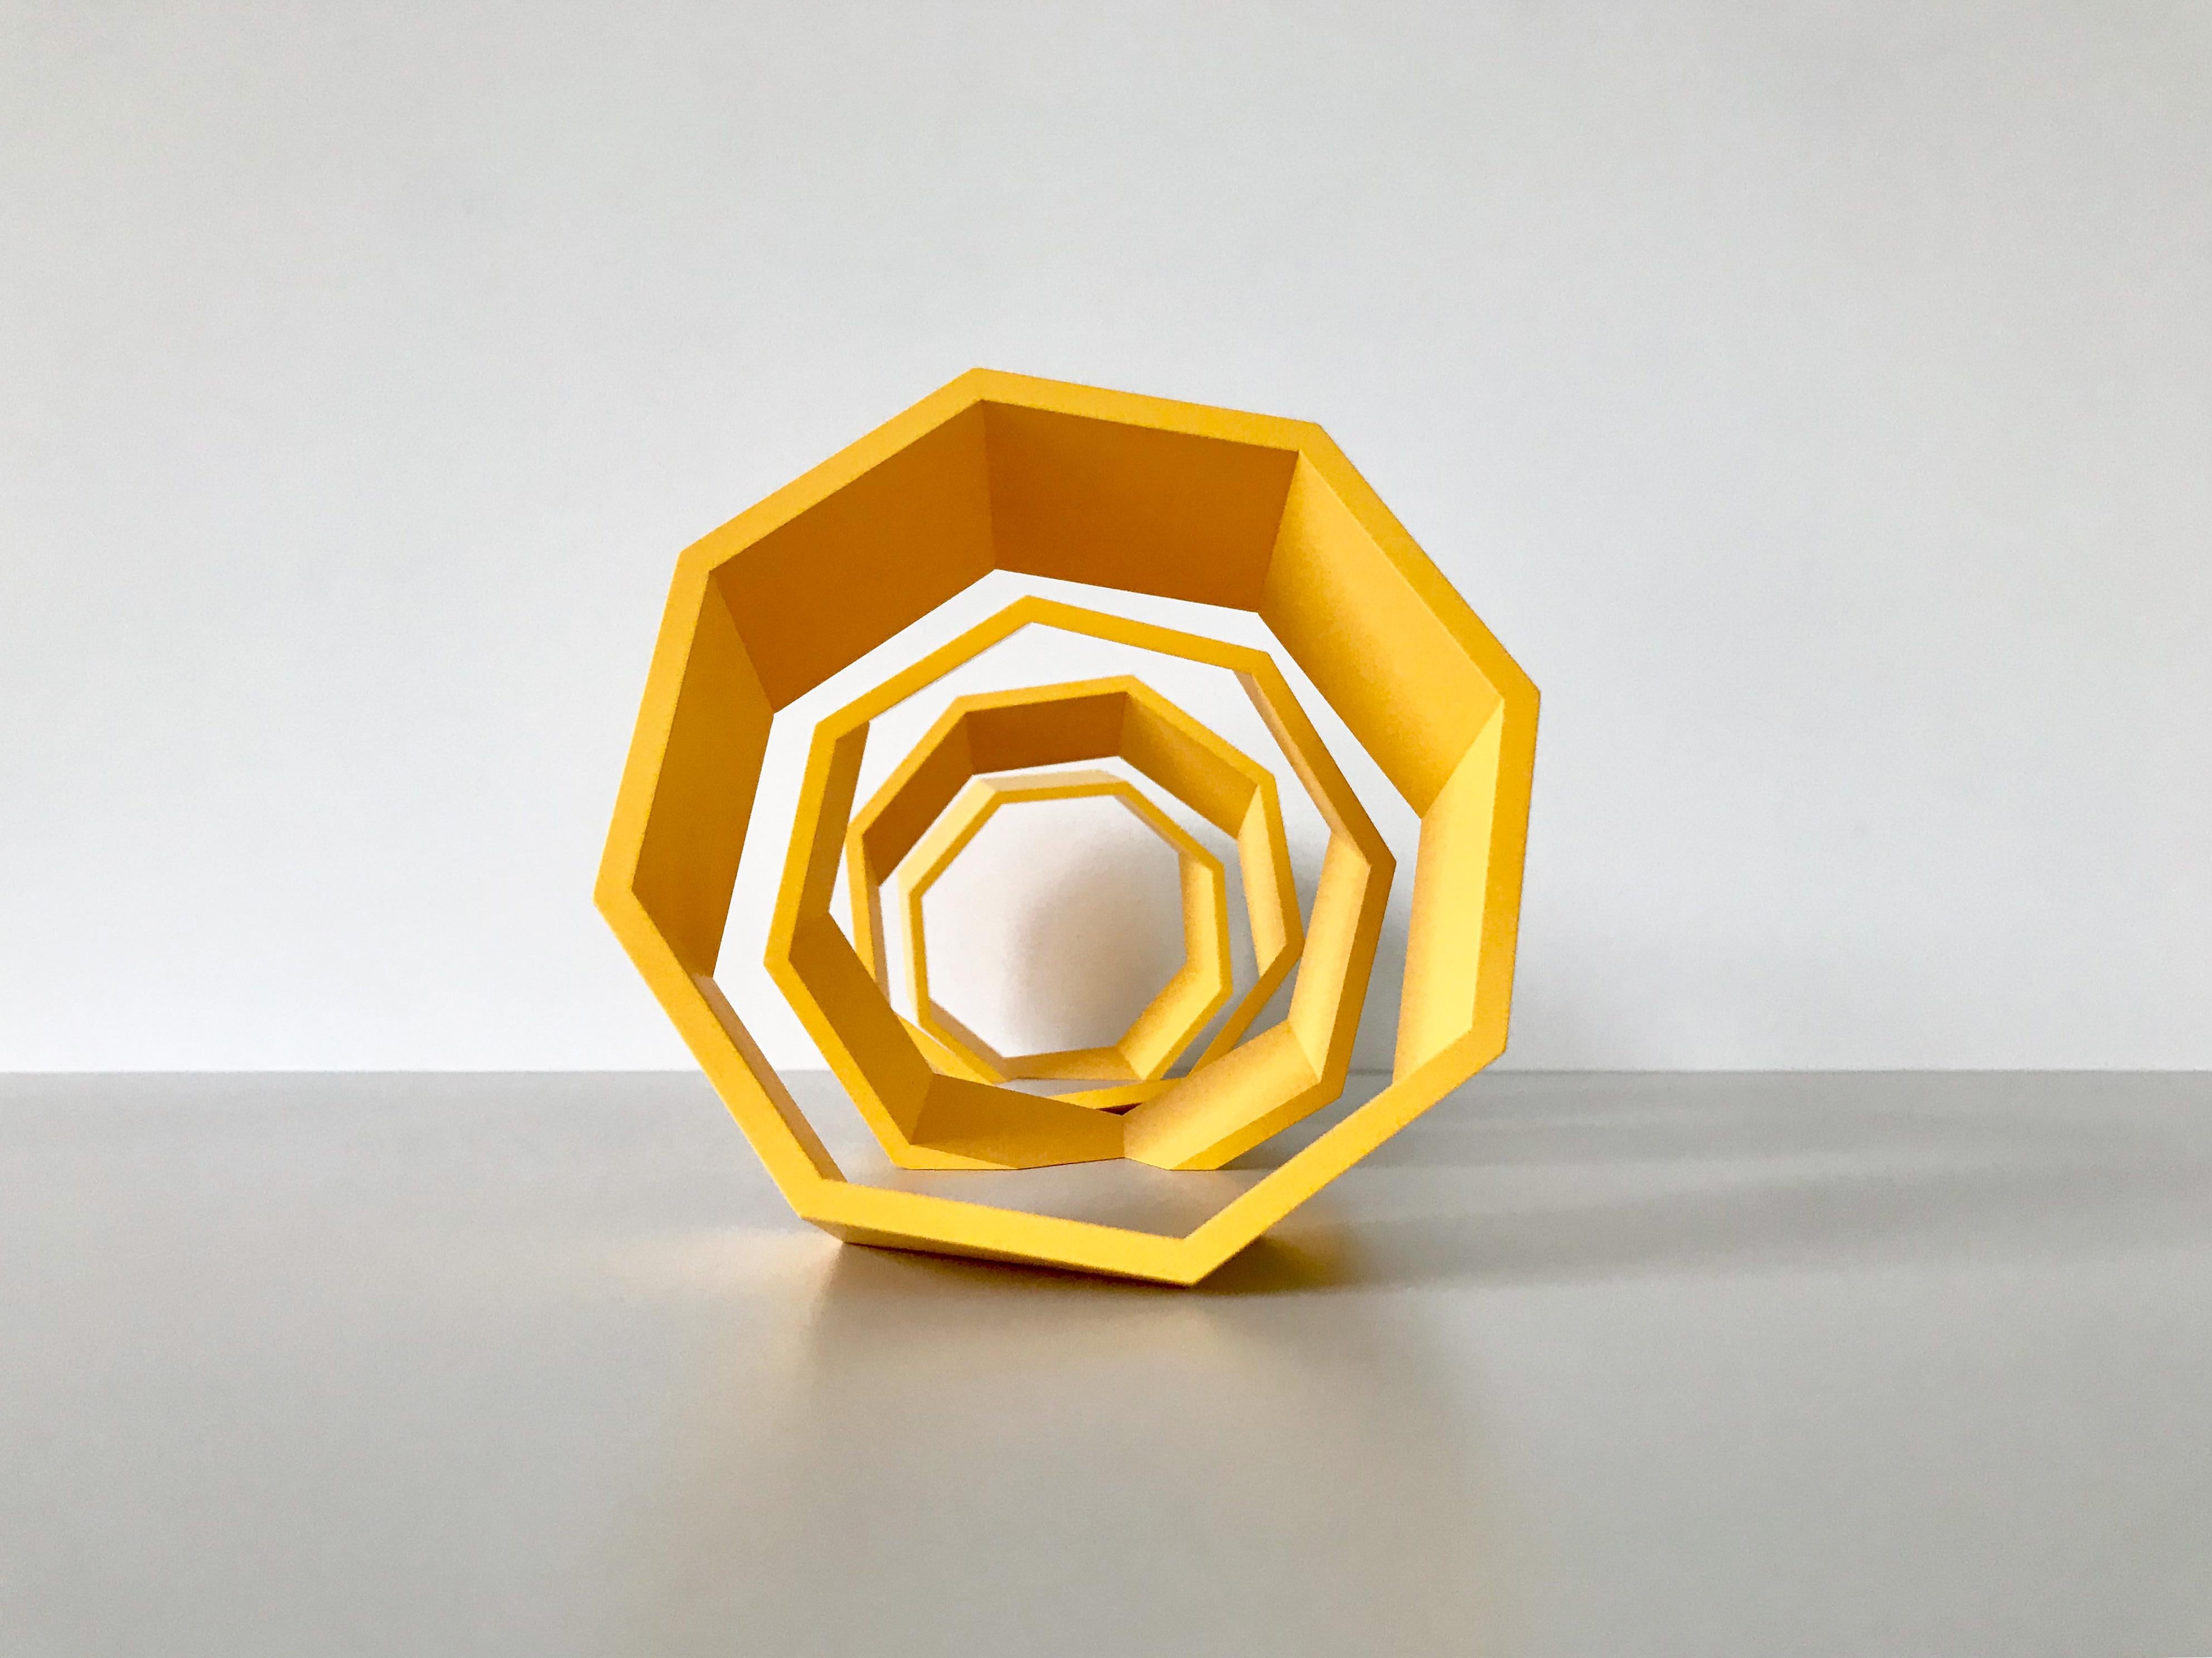 Untitled (yellow octagons), Contemporary Abstract Sculpture, 2018 2